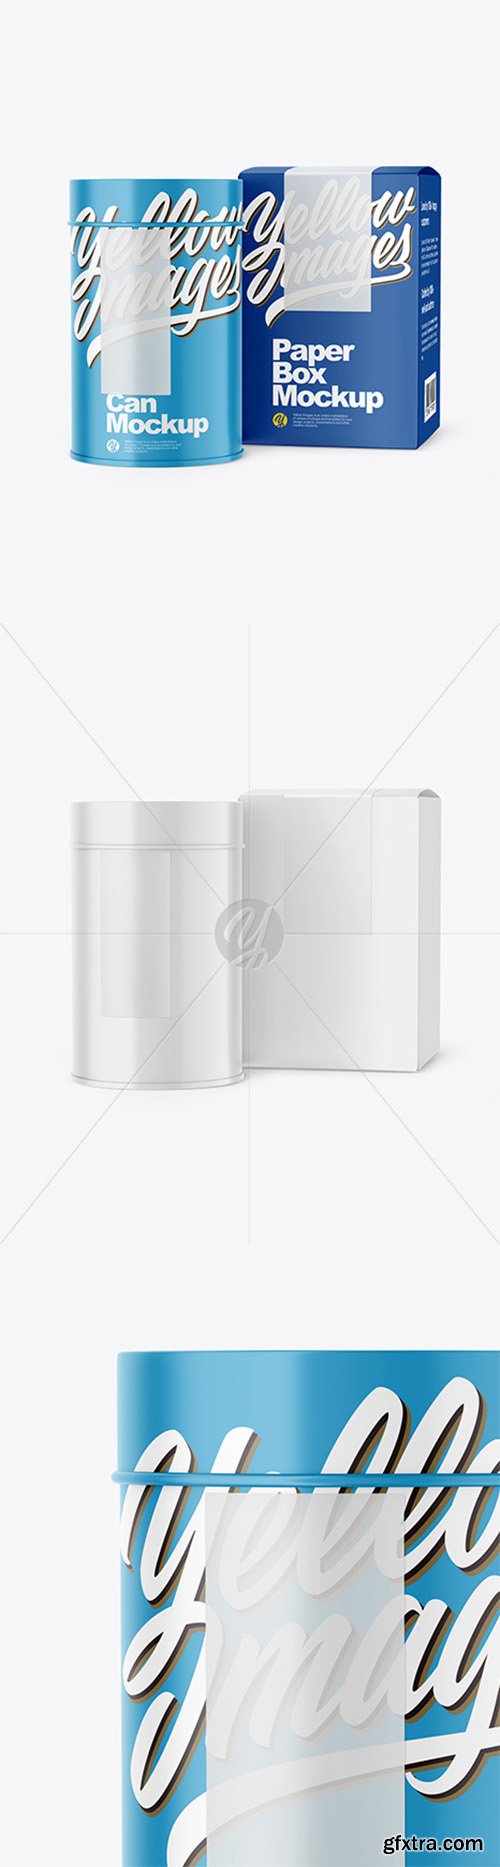 Can with Box Mockup 55250